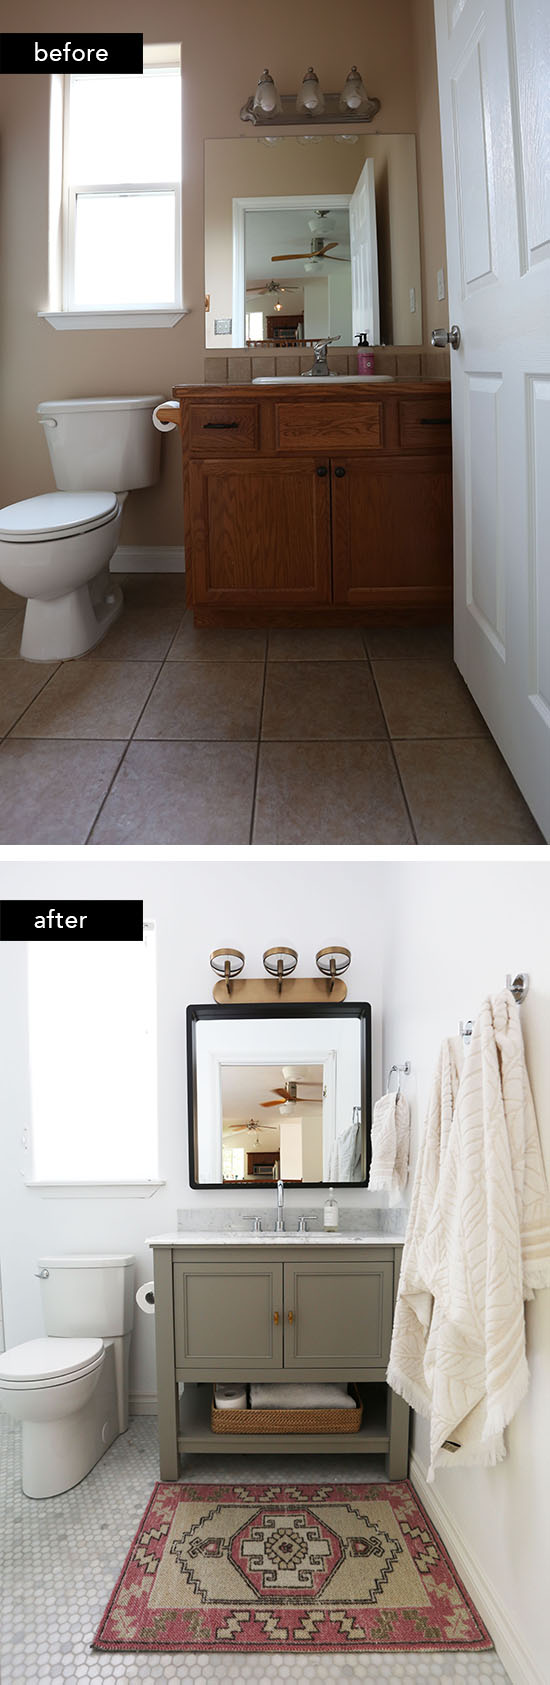 From boring builder beige to bright & beautiful: our guest bathroom remodel